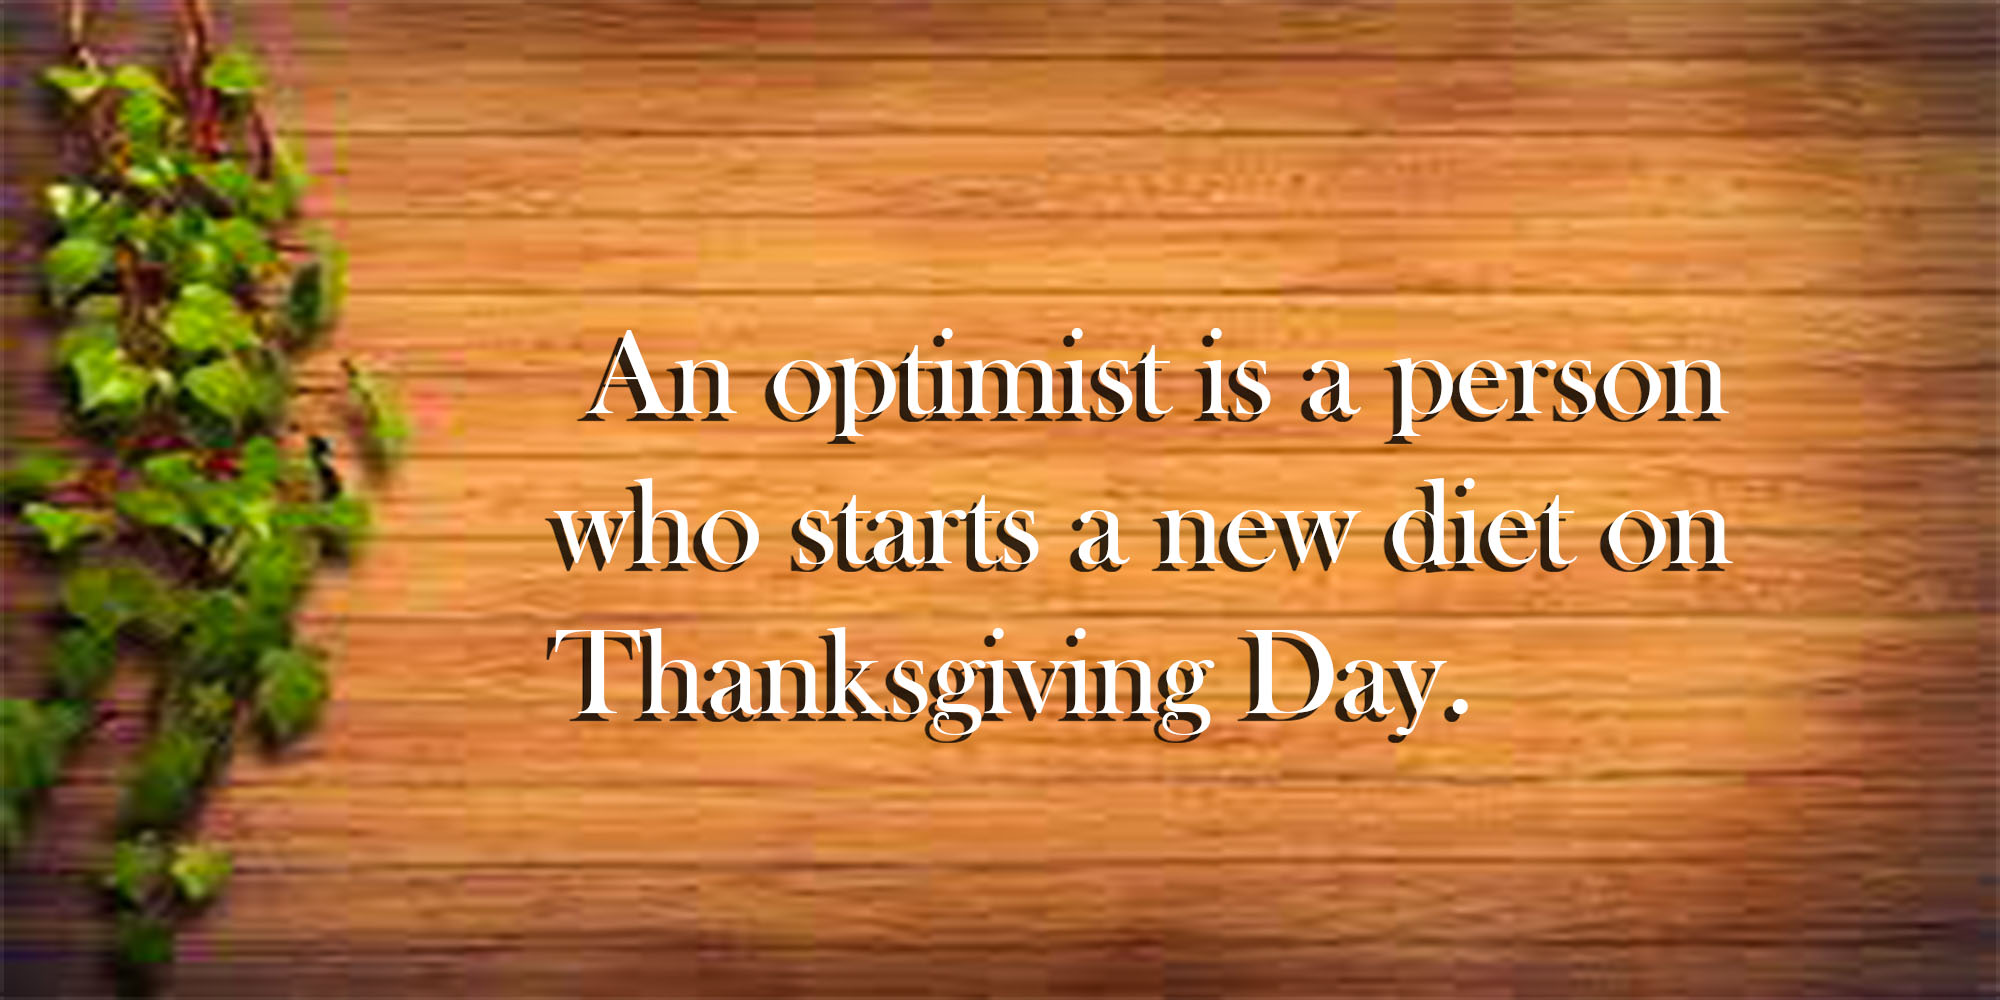 Thanksgiving Day 2022: Quotes, Greeting, Sayings, Wishes, Image, Pictures, Photos, Messages, SMS, Pic, Sayings, Wallpapers & Status